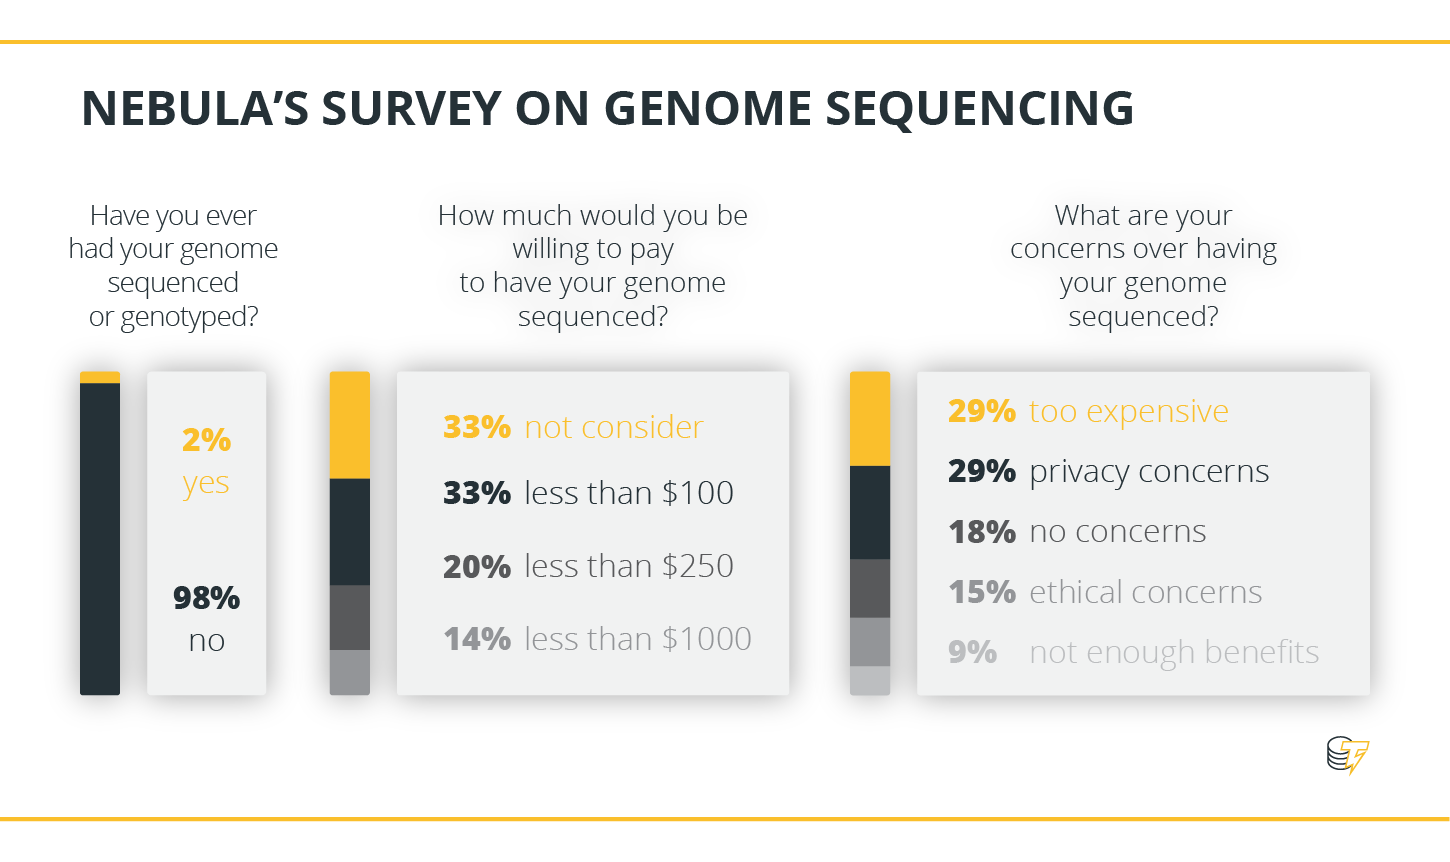 NEBULA'S SURVEY ON GENOME SEQUENCING